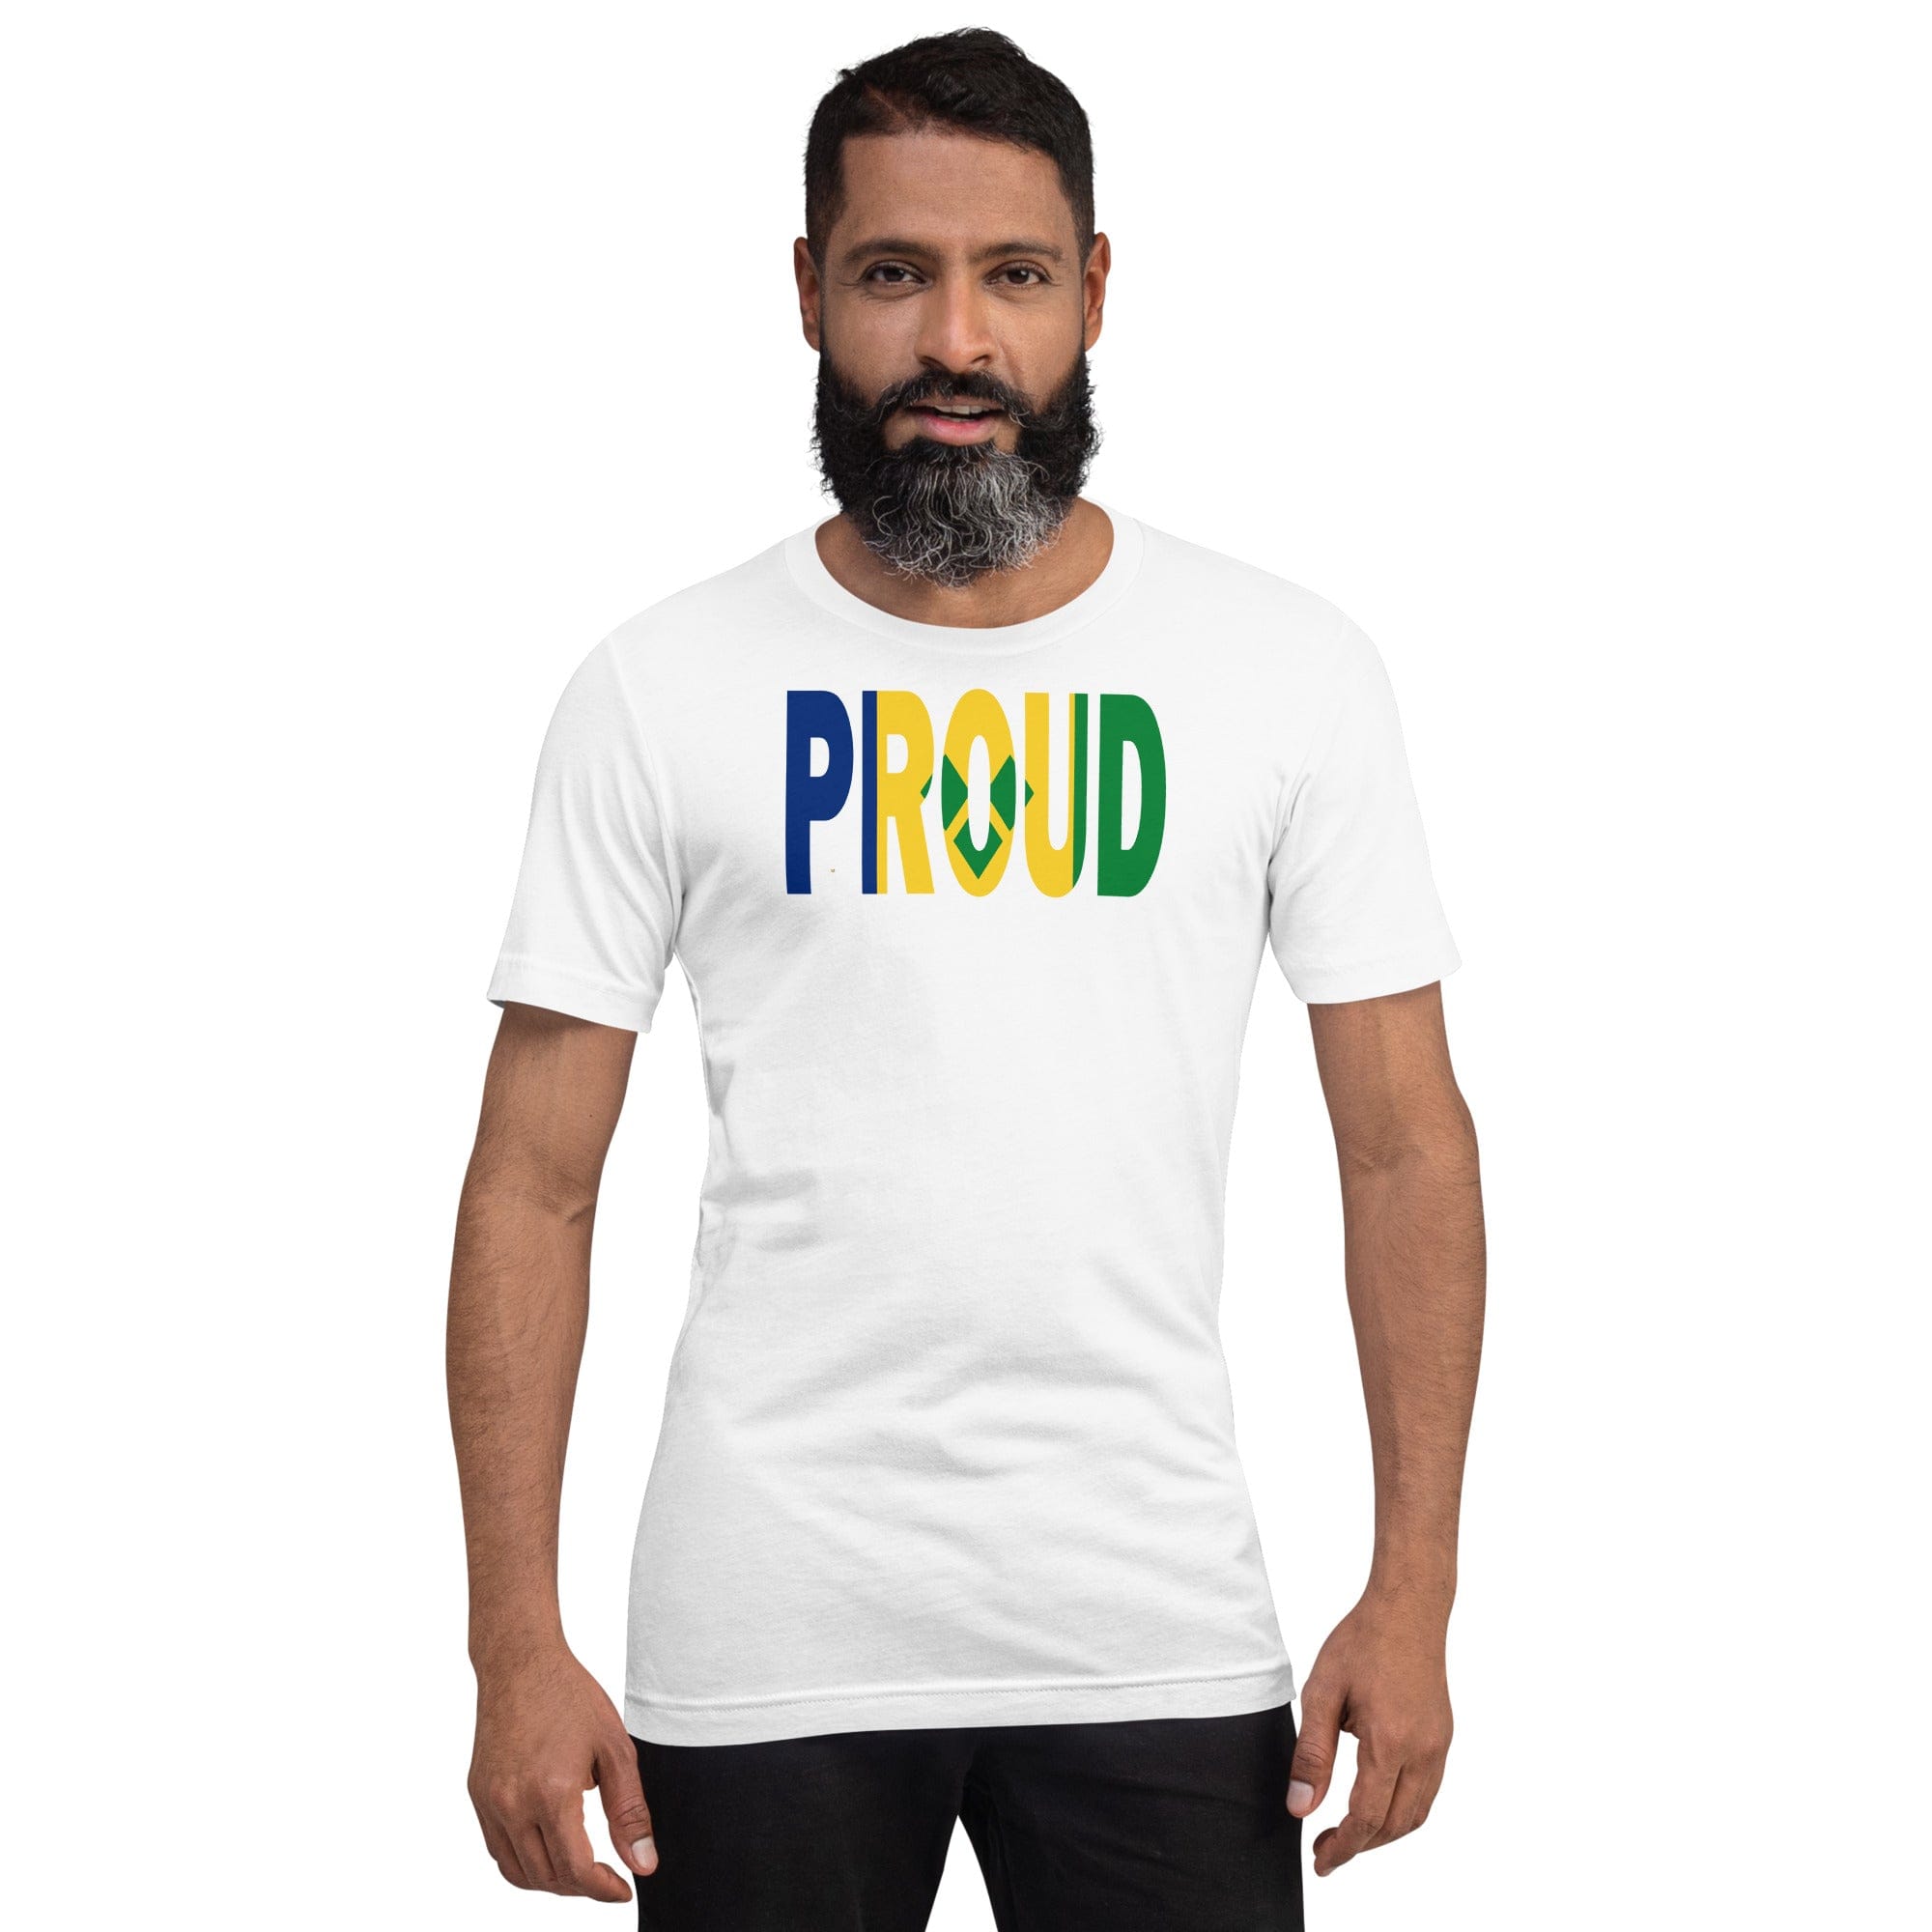 St. Vincent Flag designed to spell Proud on a white color t-shirt worn by a black man.